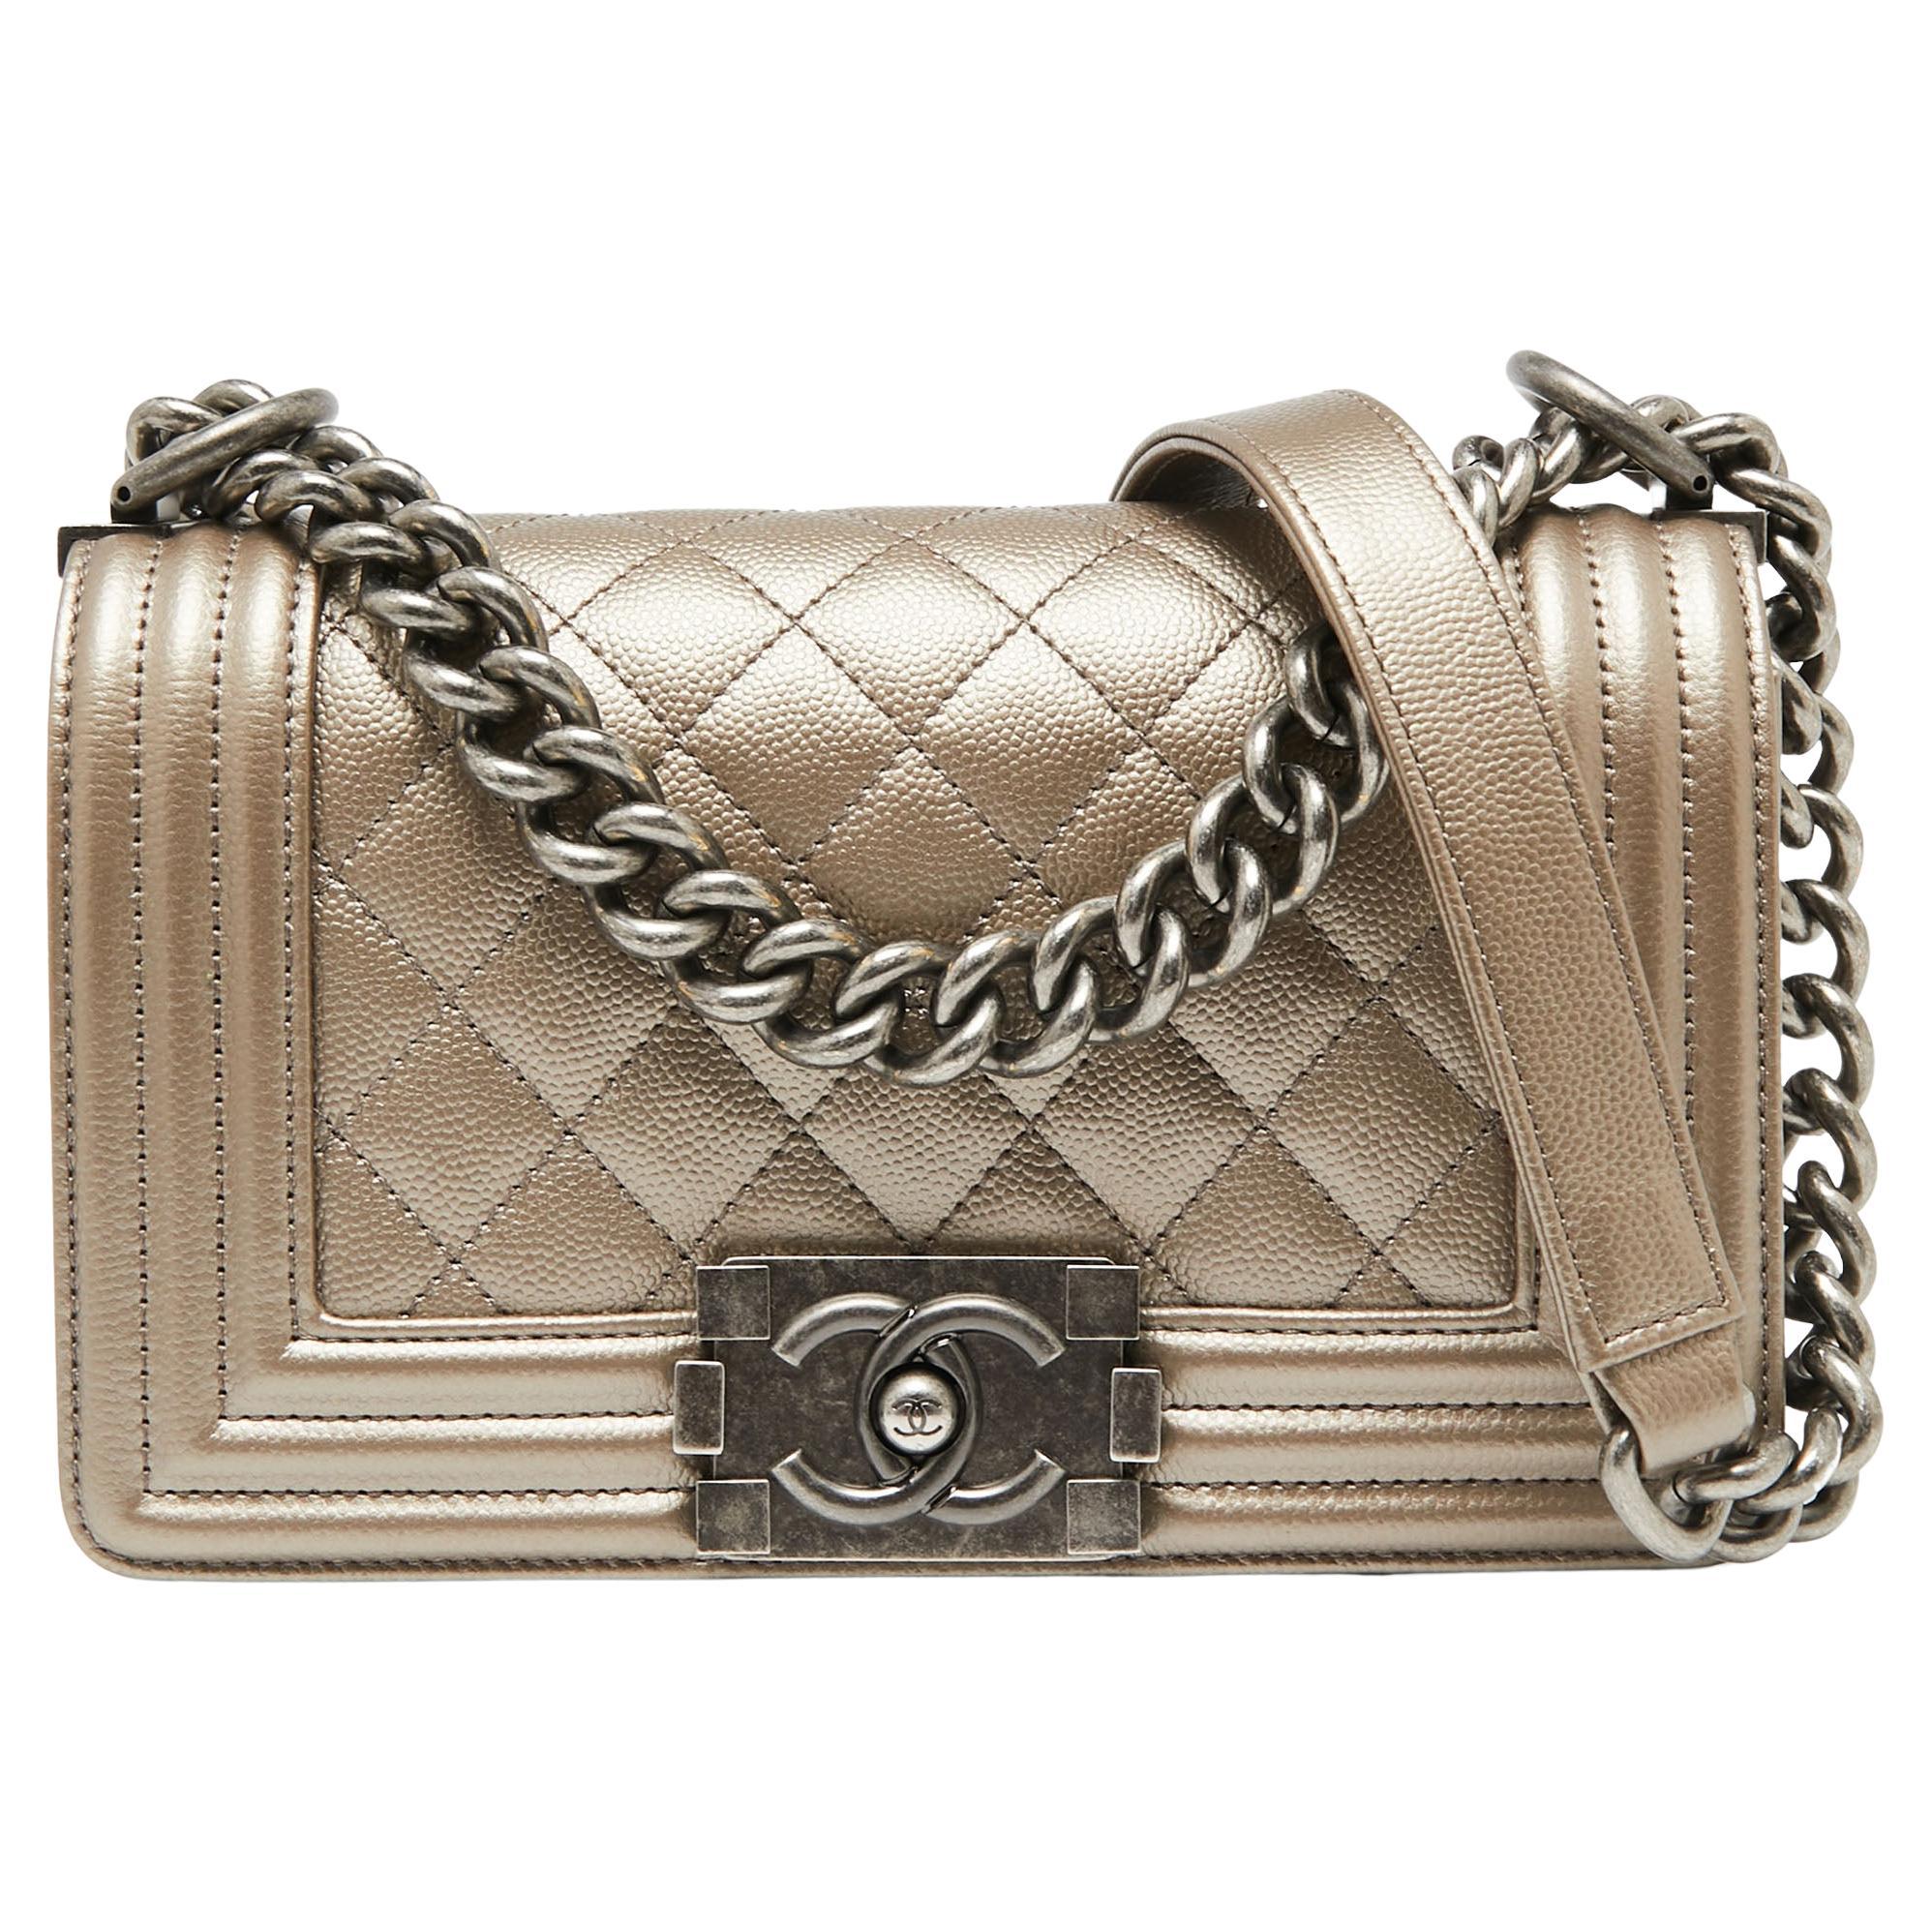 Chanel Metallic Beige Quilted Caviar Leather Small Boy Flap Bag